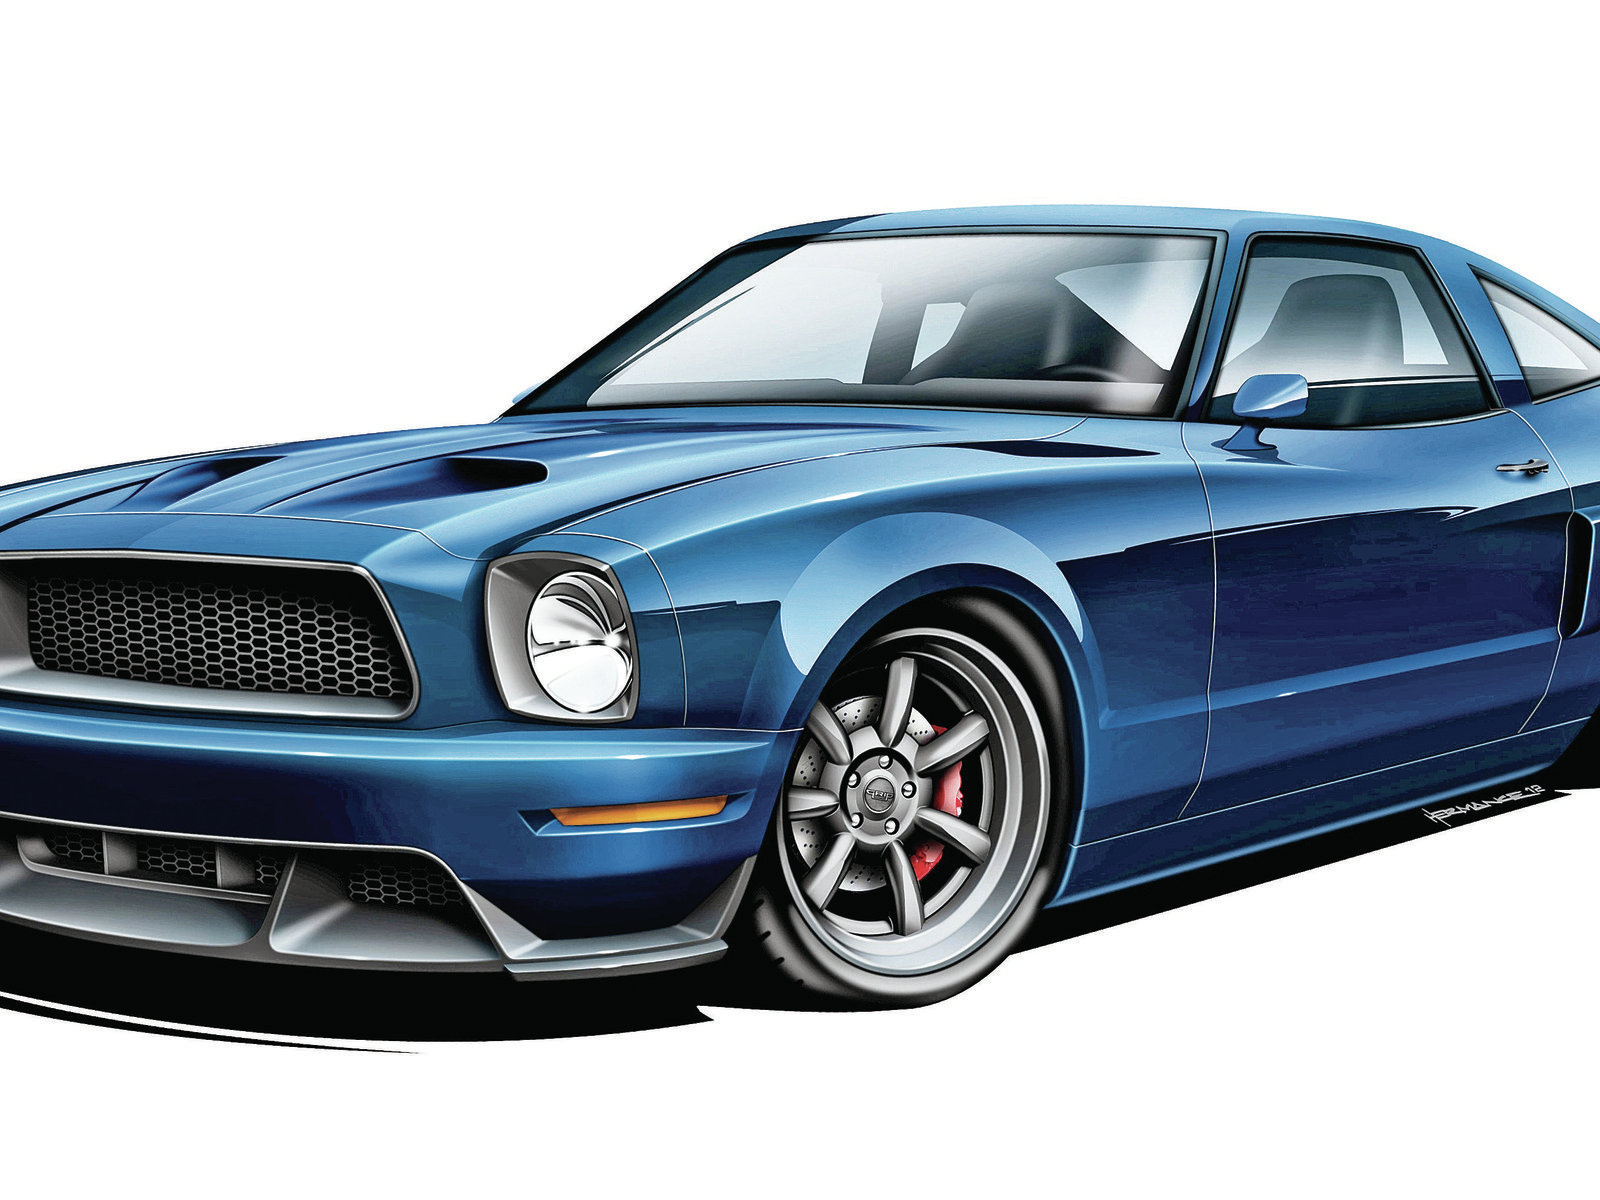 Ford Mustang Concept Art